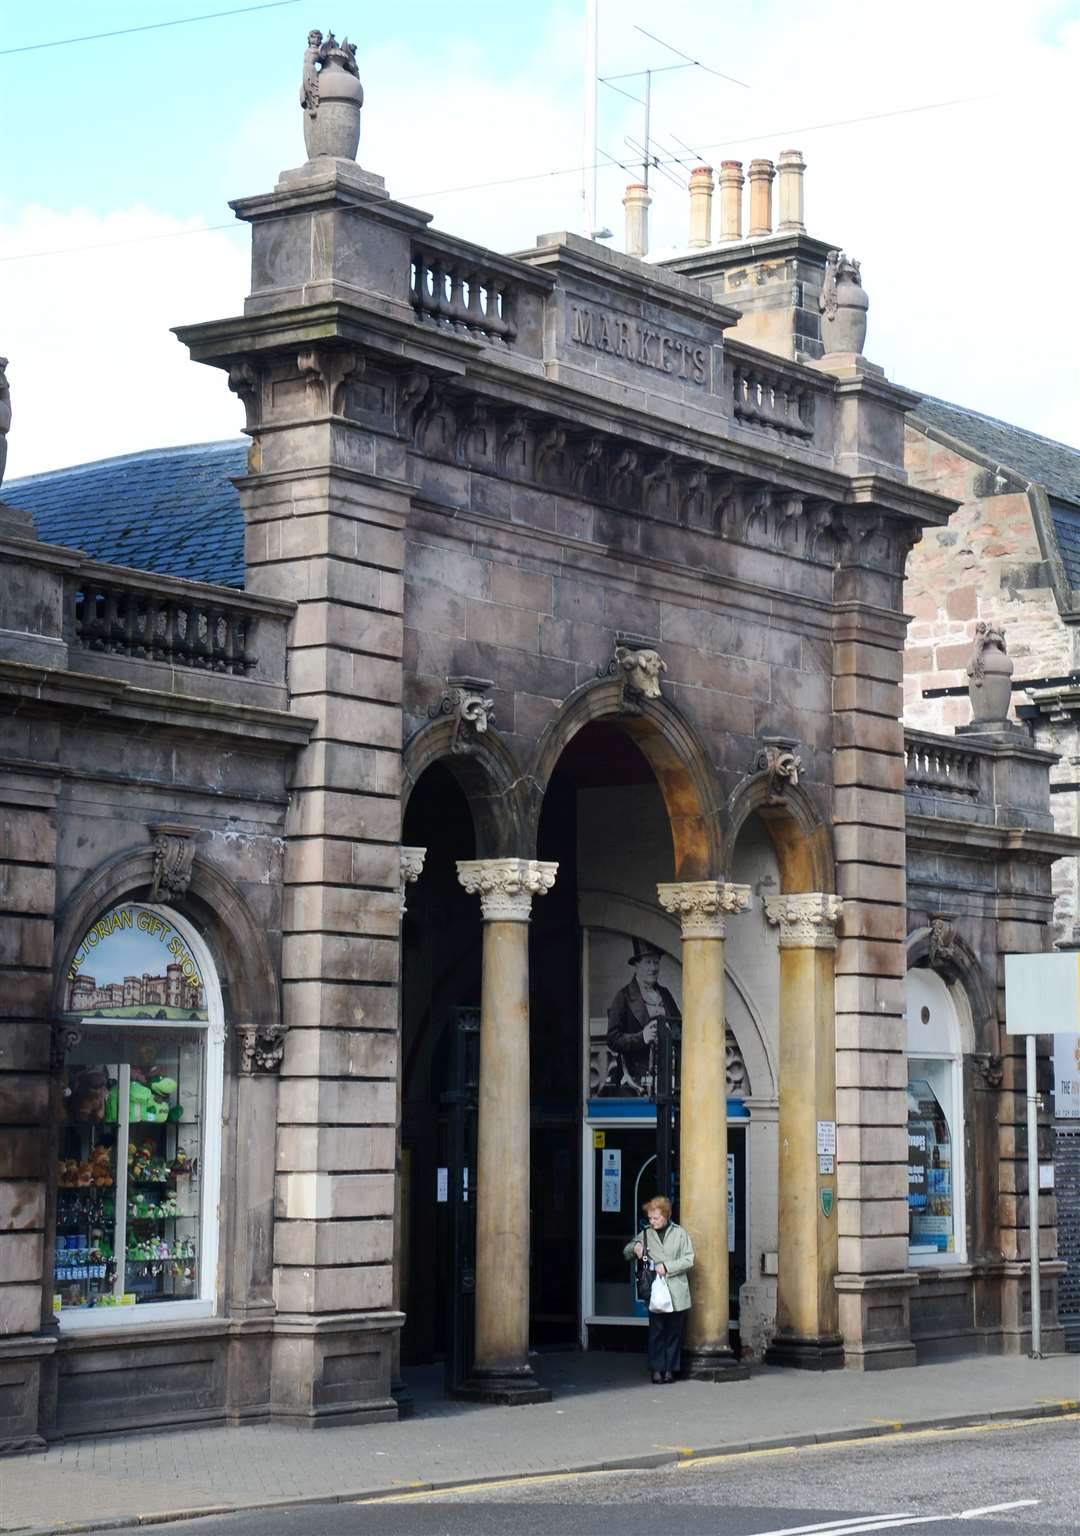 The Victorian Market in Inverness.